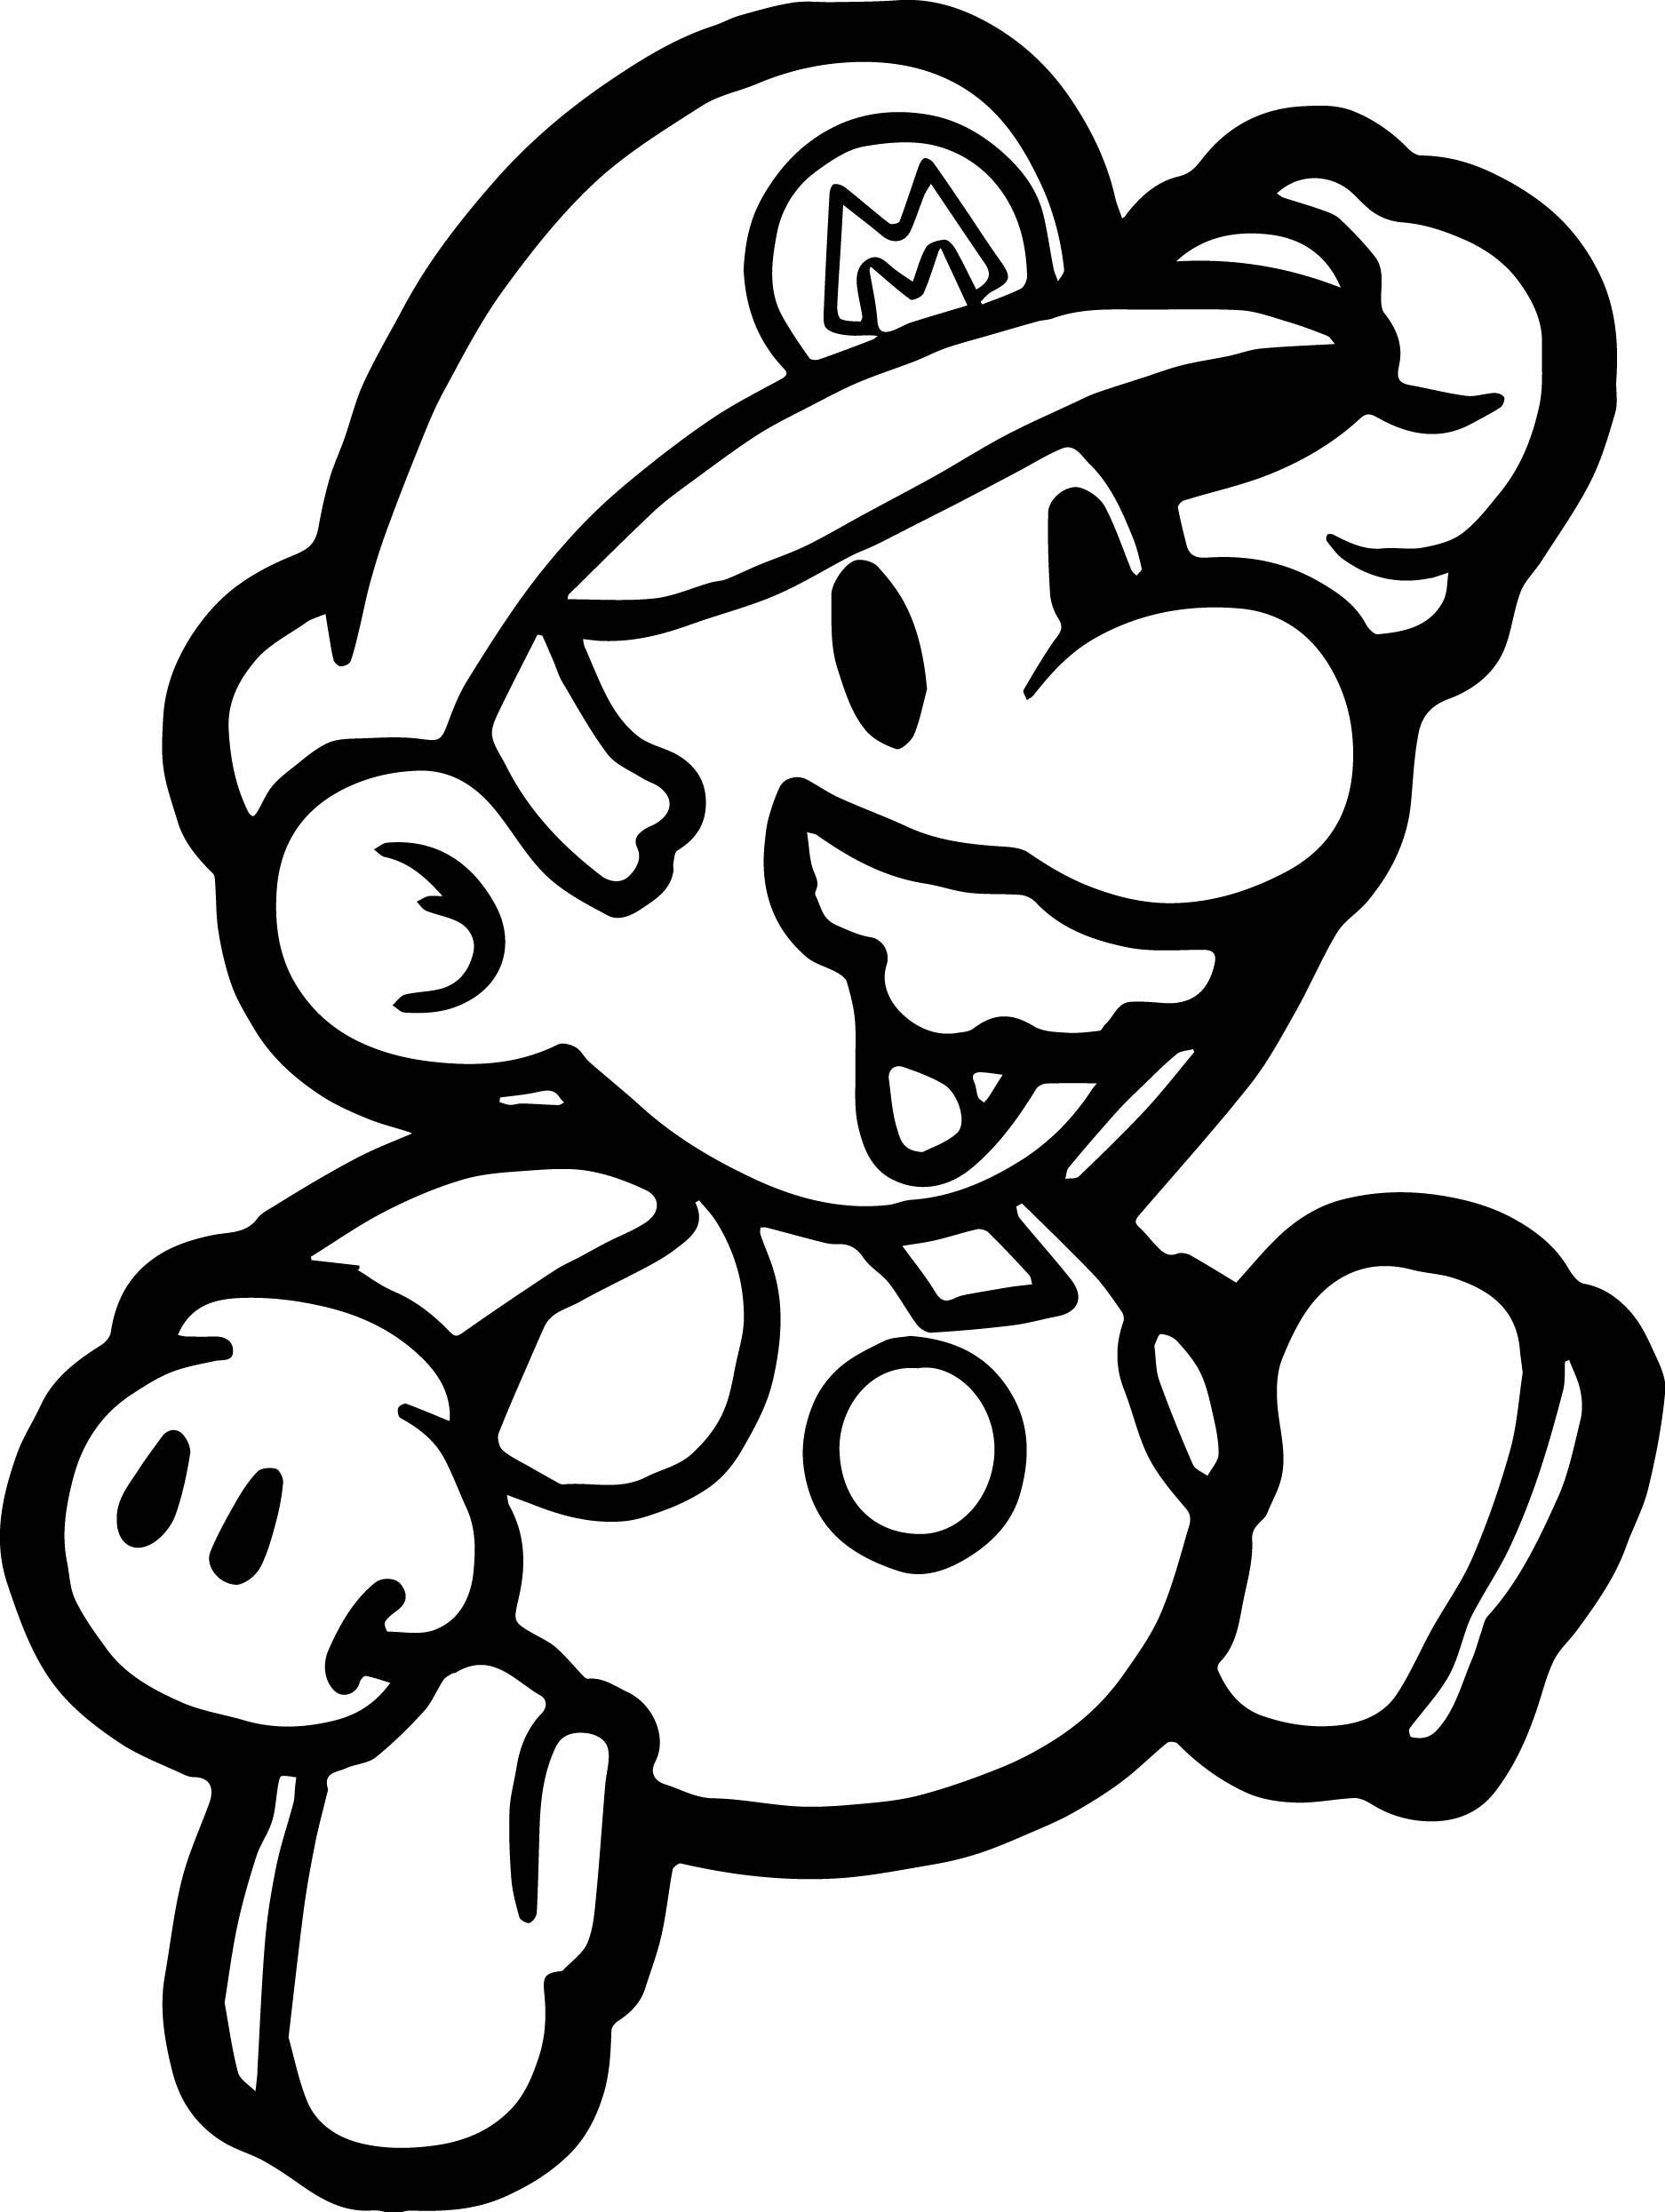 Super Mario Odyssey Coloring Pages Grand Moon Free Printable Coloring Pages